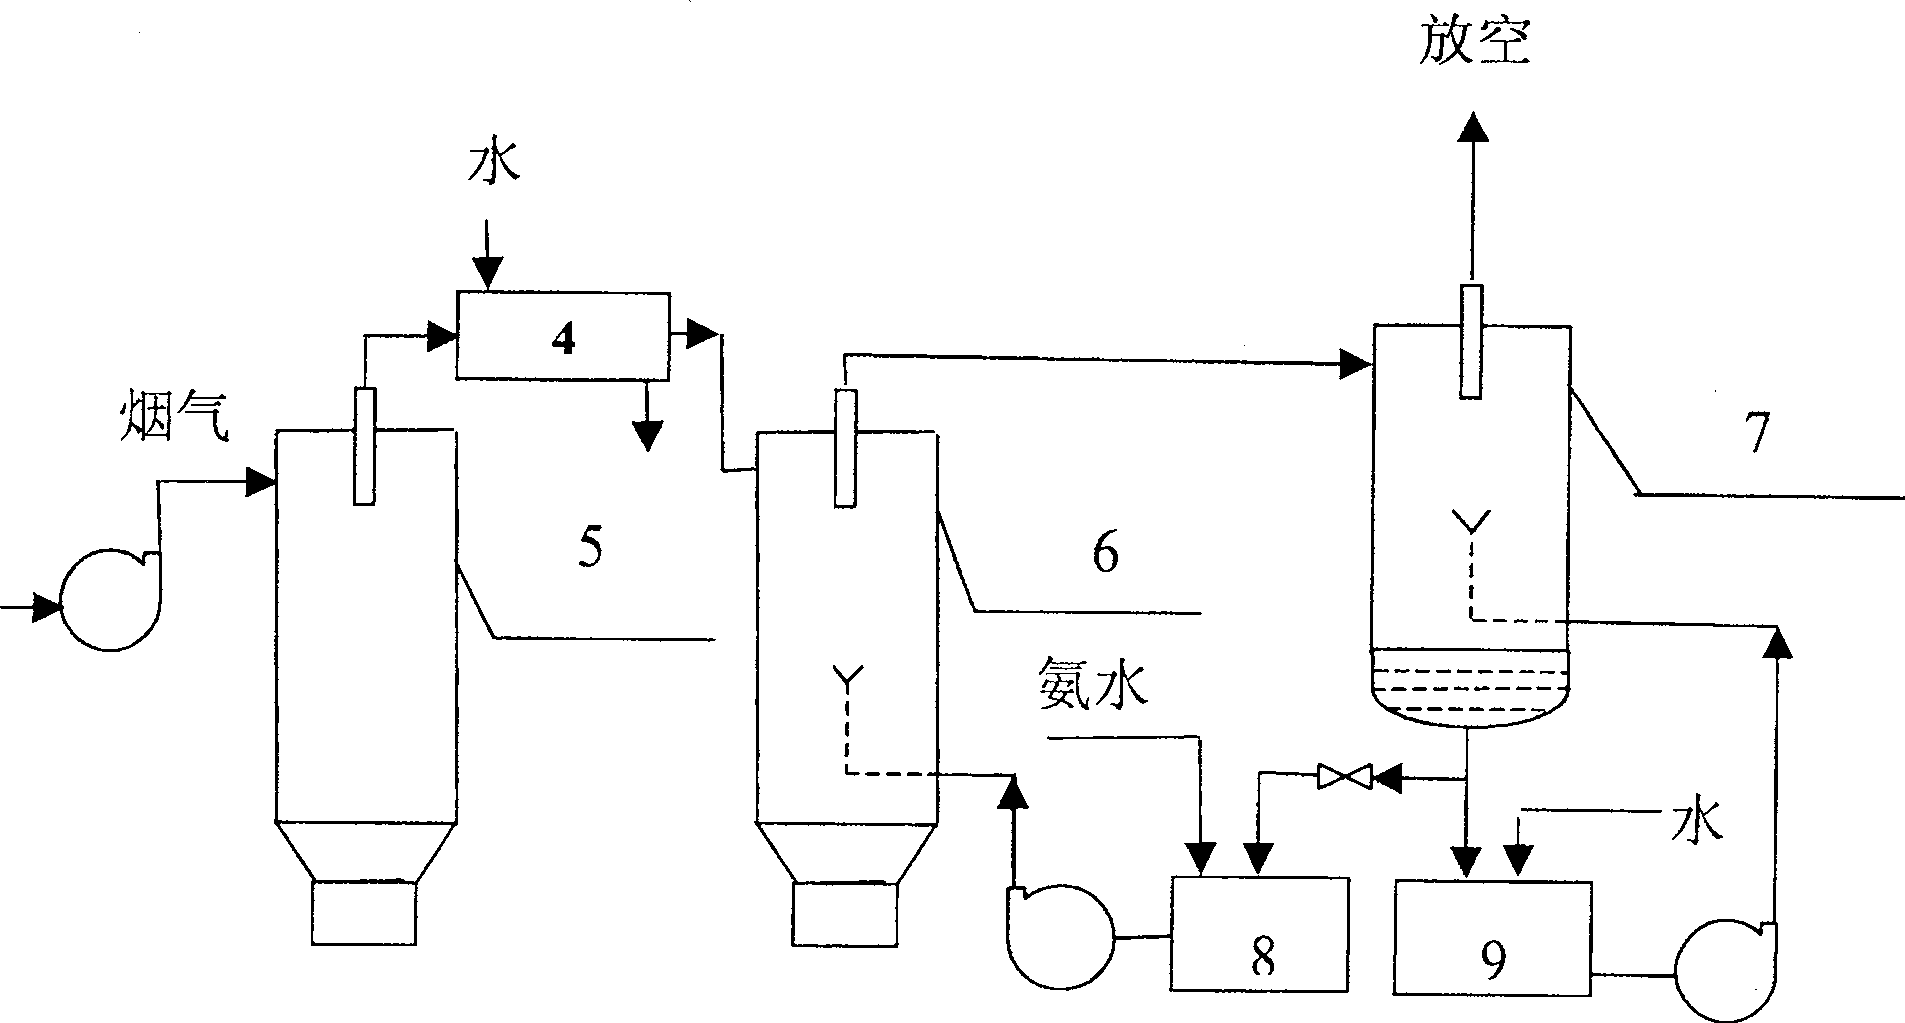 Process for ammonia method desulfurization of fume and by-producing ammonium sulfite